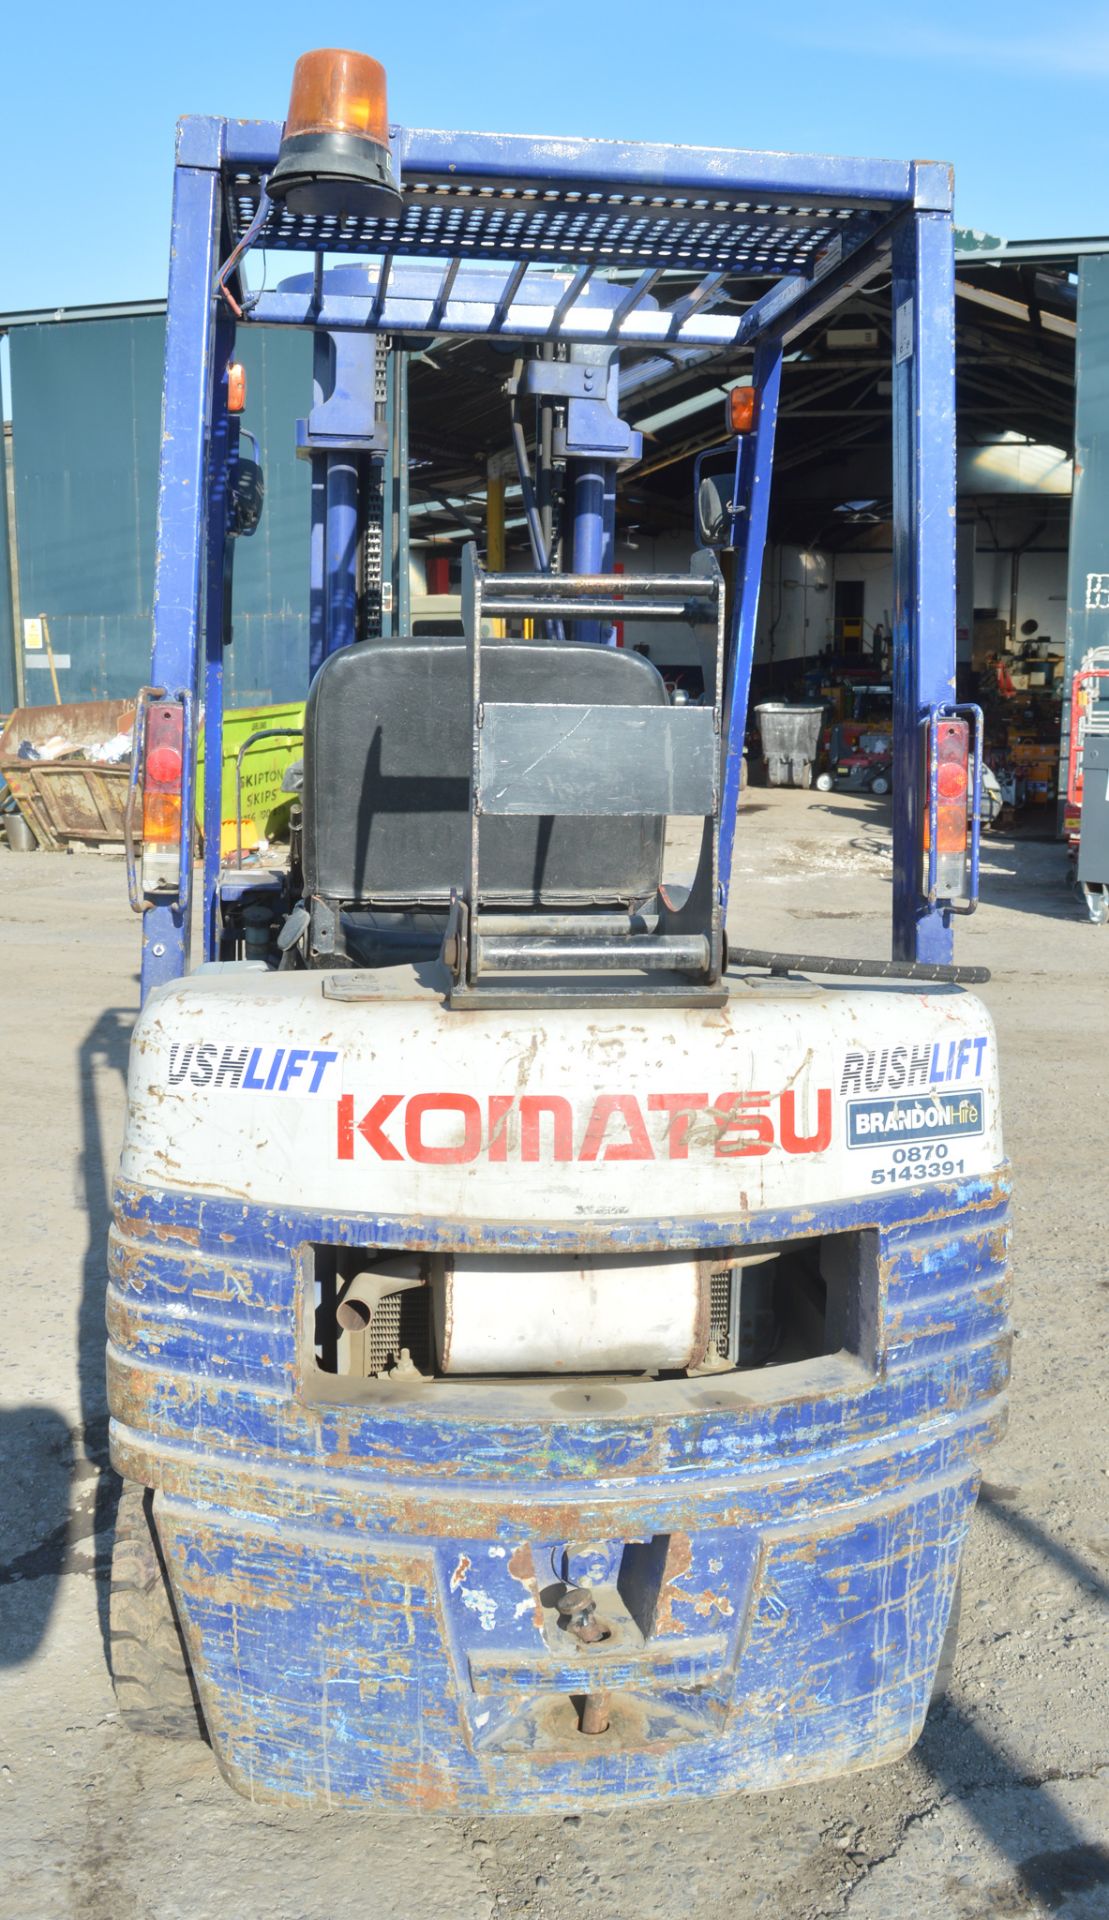 Komatsu FG20ST-11 3.5 tonne gas powered fork lift truck  Year: 1995 S/N: 406543A  Recorded hours: - Image 6 of 7